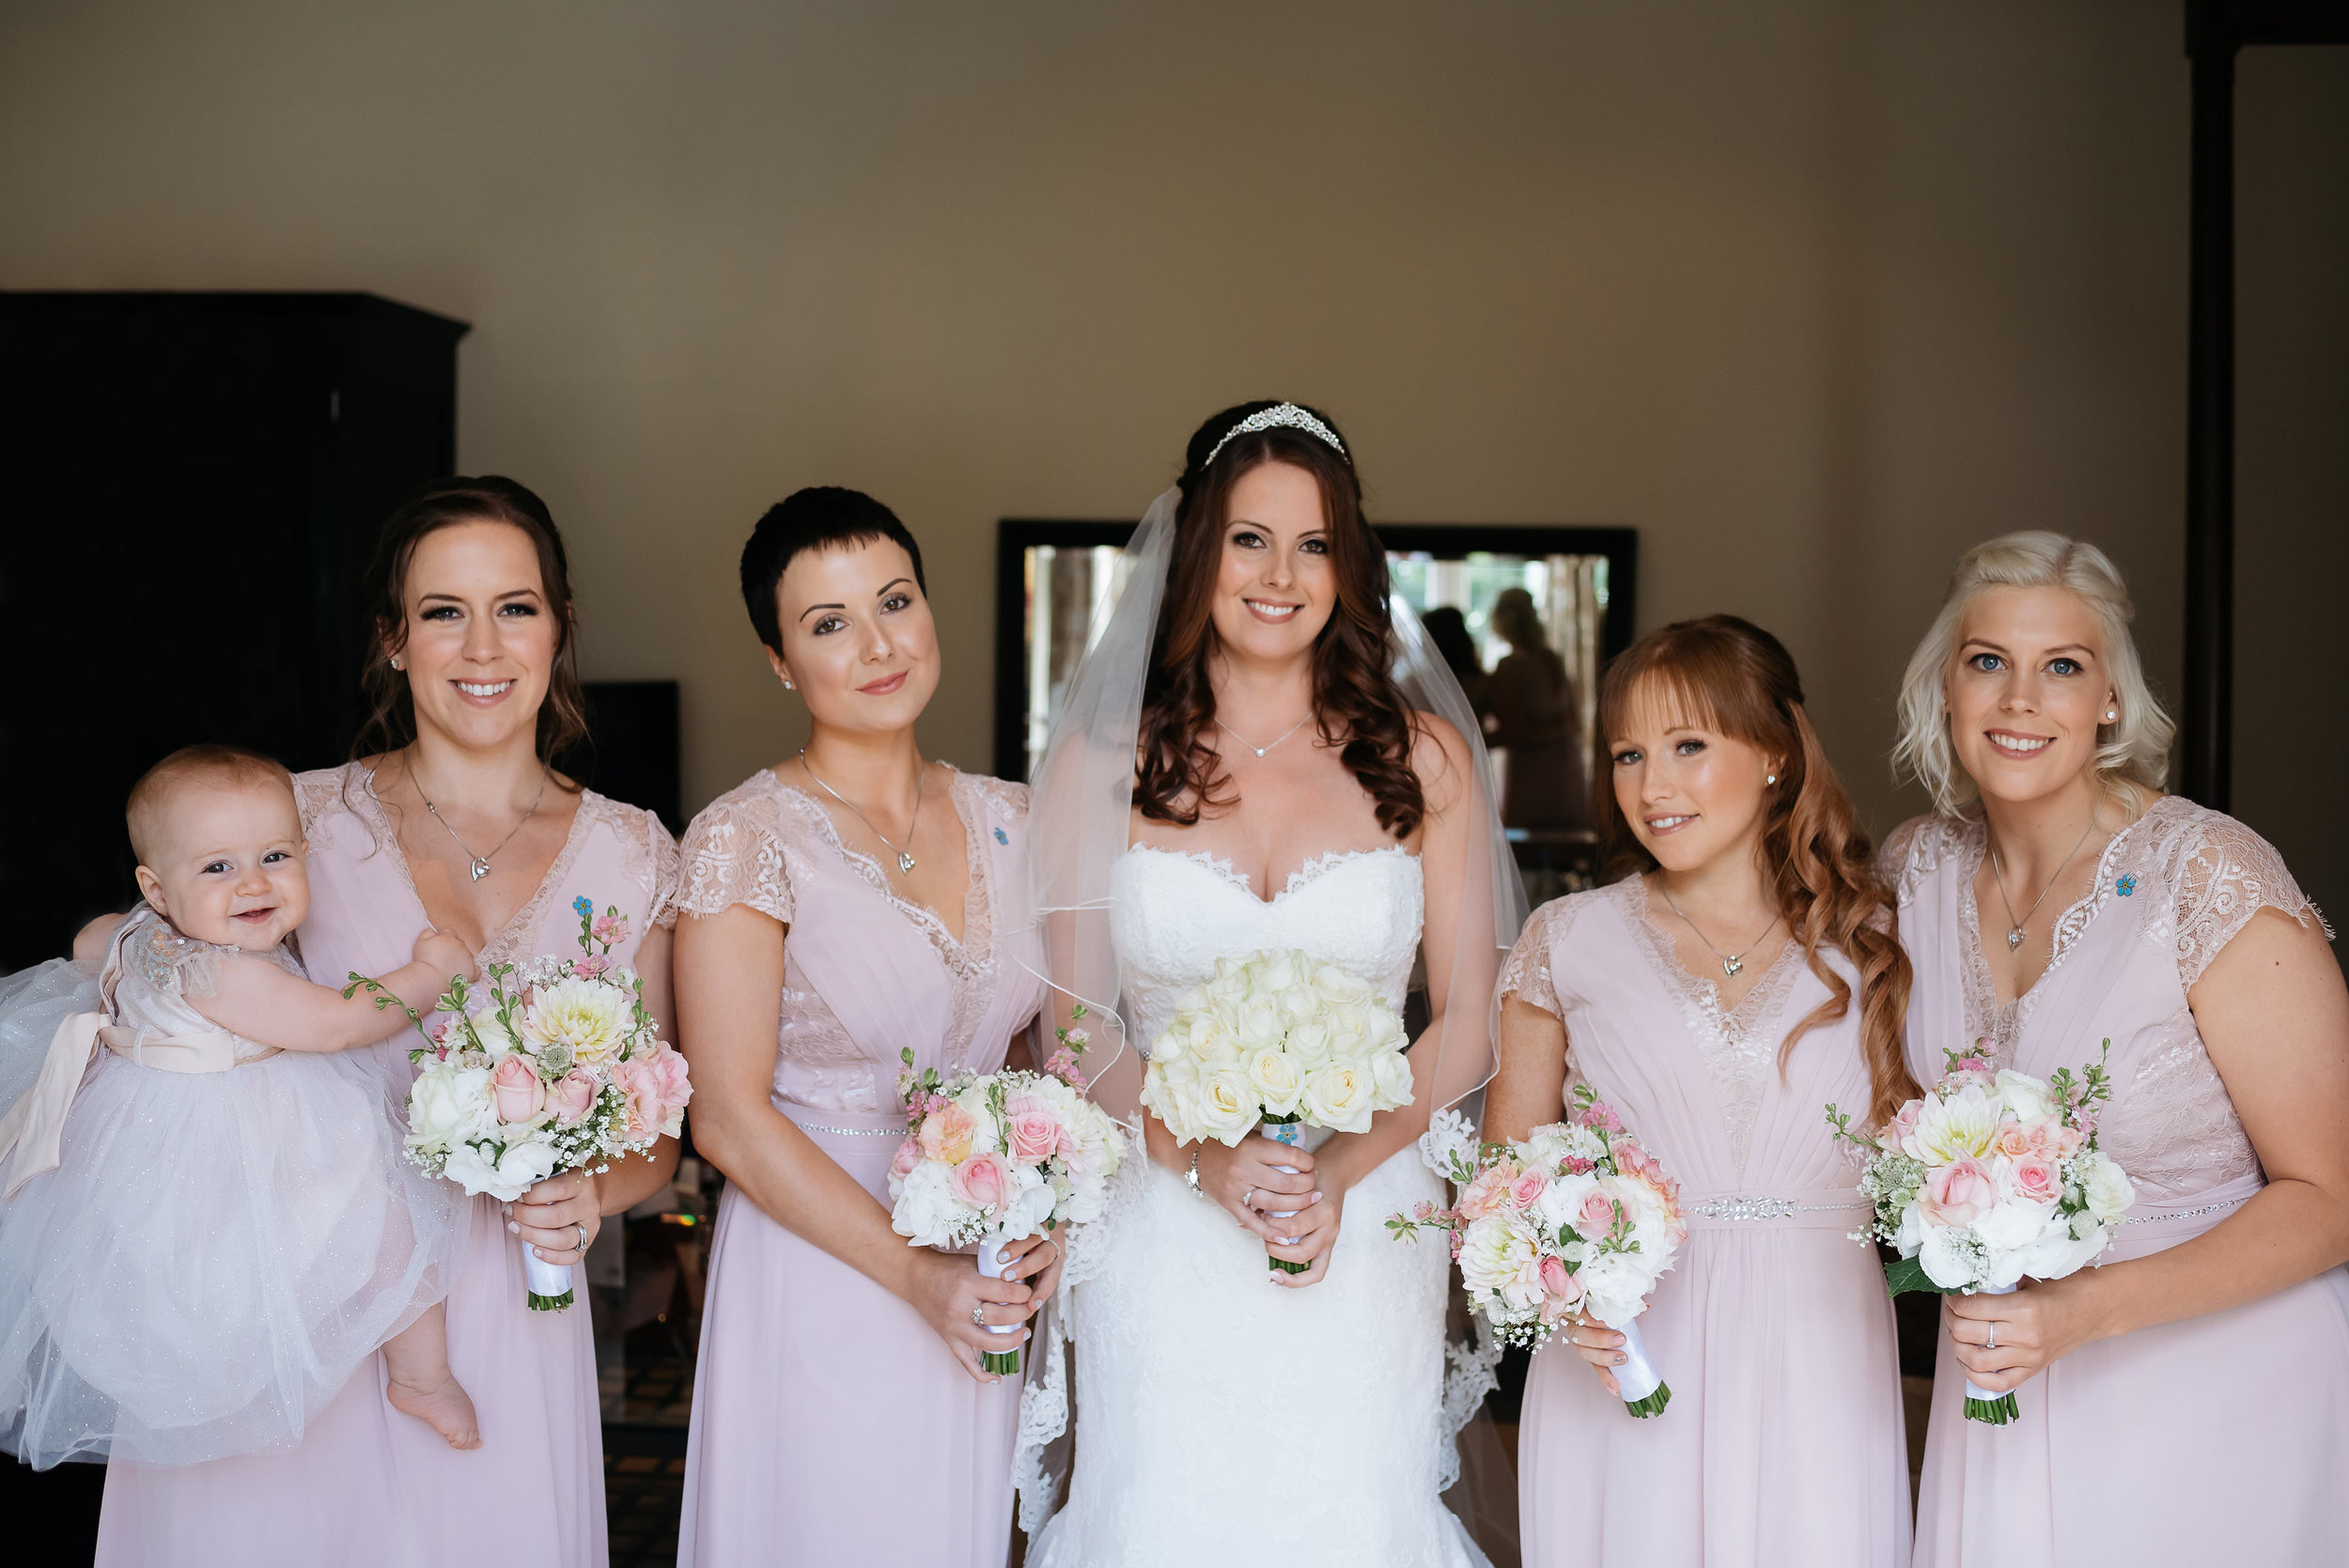 bride and bridesmaids posing for a photograph